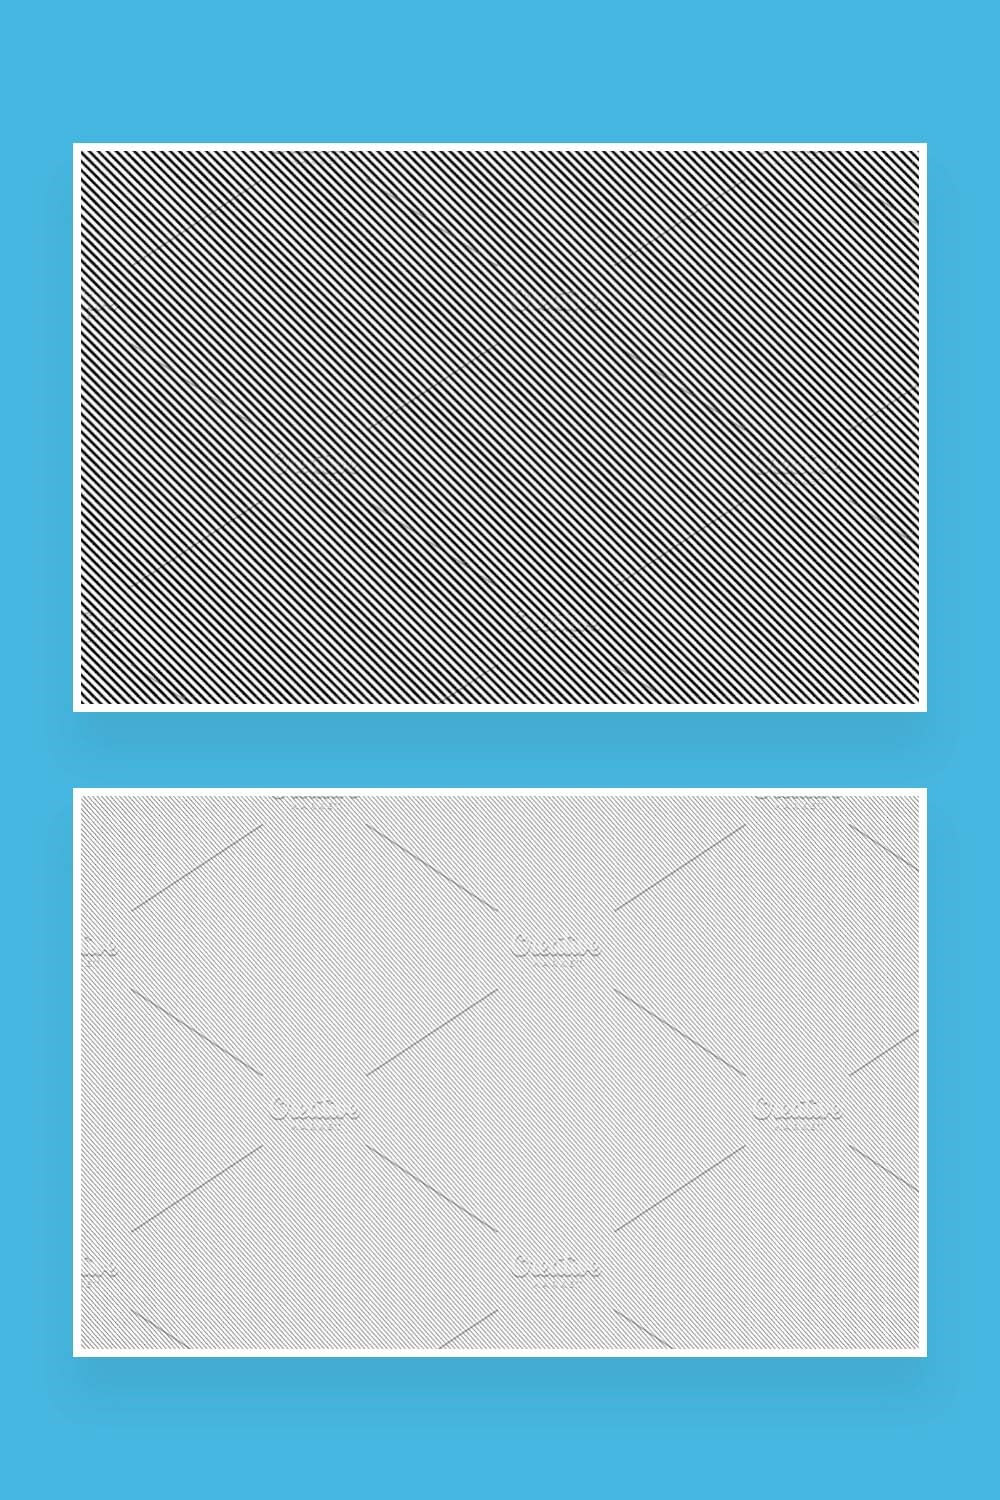 Two pictures with simple striped black and white patterns, oblique black and gray thin lines.